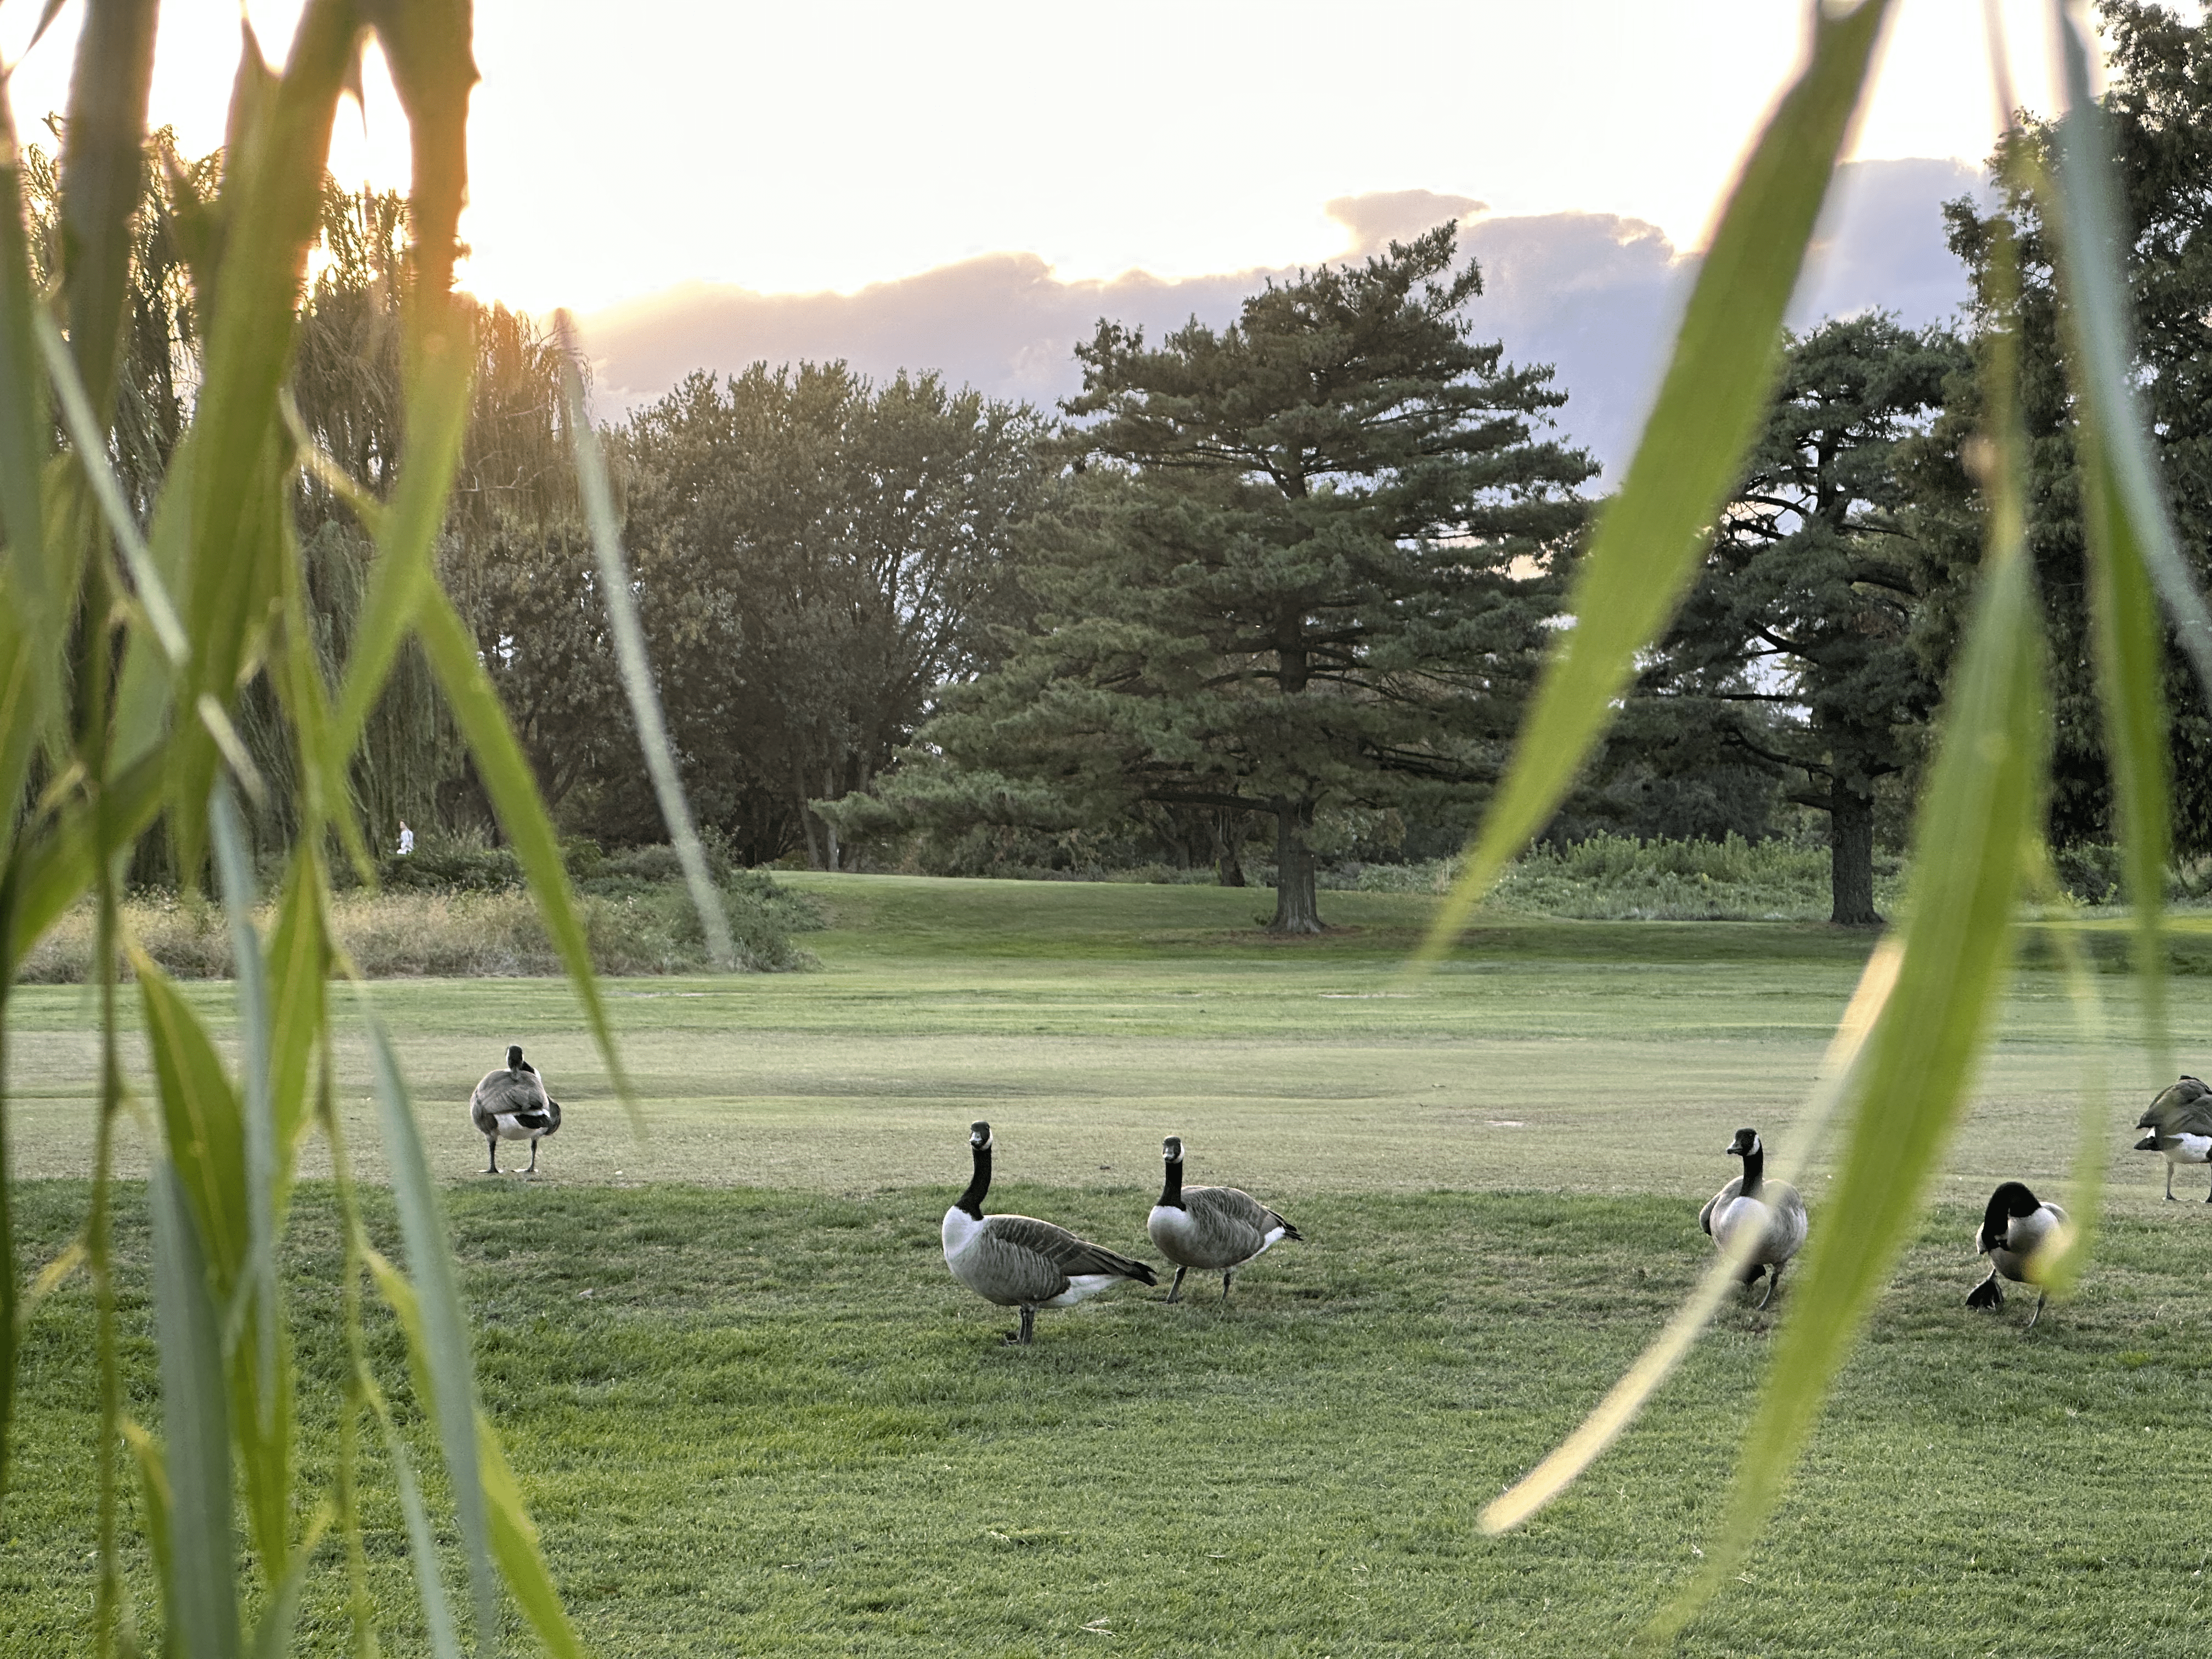 Six Canada geese congregate on the East Potomac Golf Links on Hains Point Island in Washington, D.C.